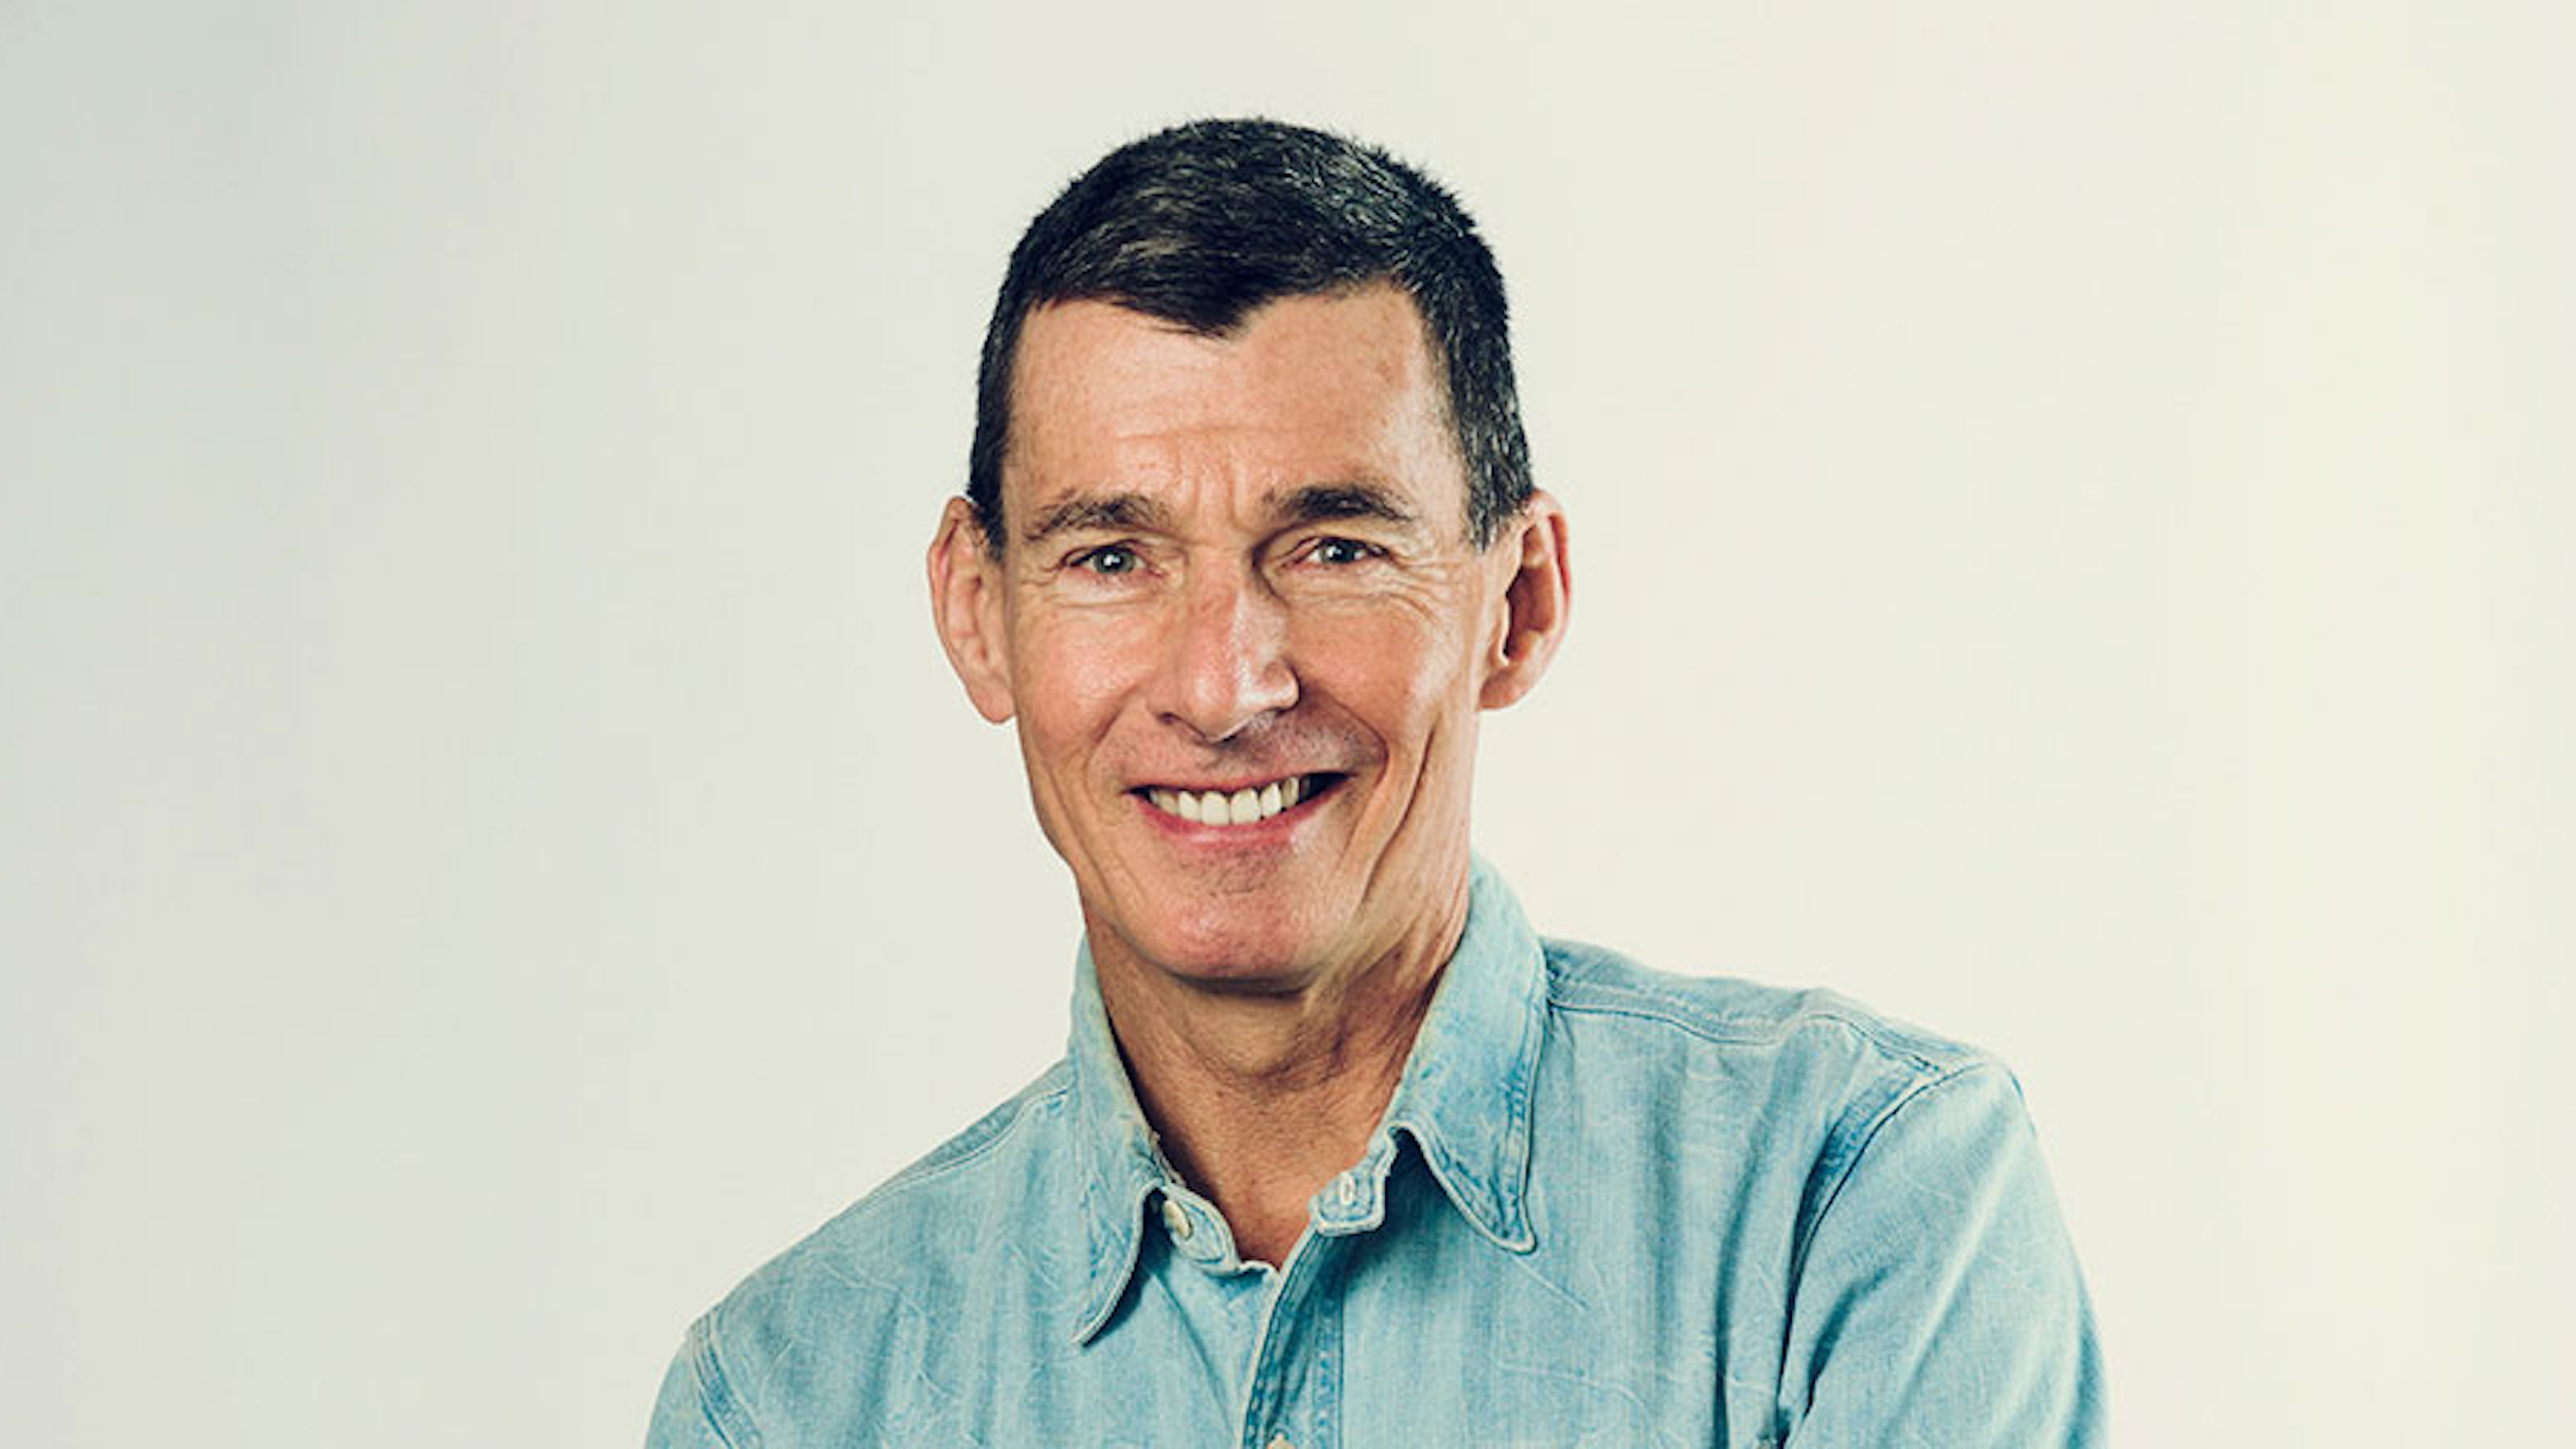 A middle-aged man with short dark hair, wearing a light blue denim AI shirt, smiling at the camera against a plain light background.